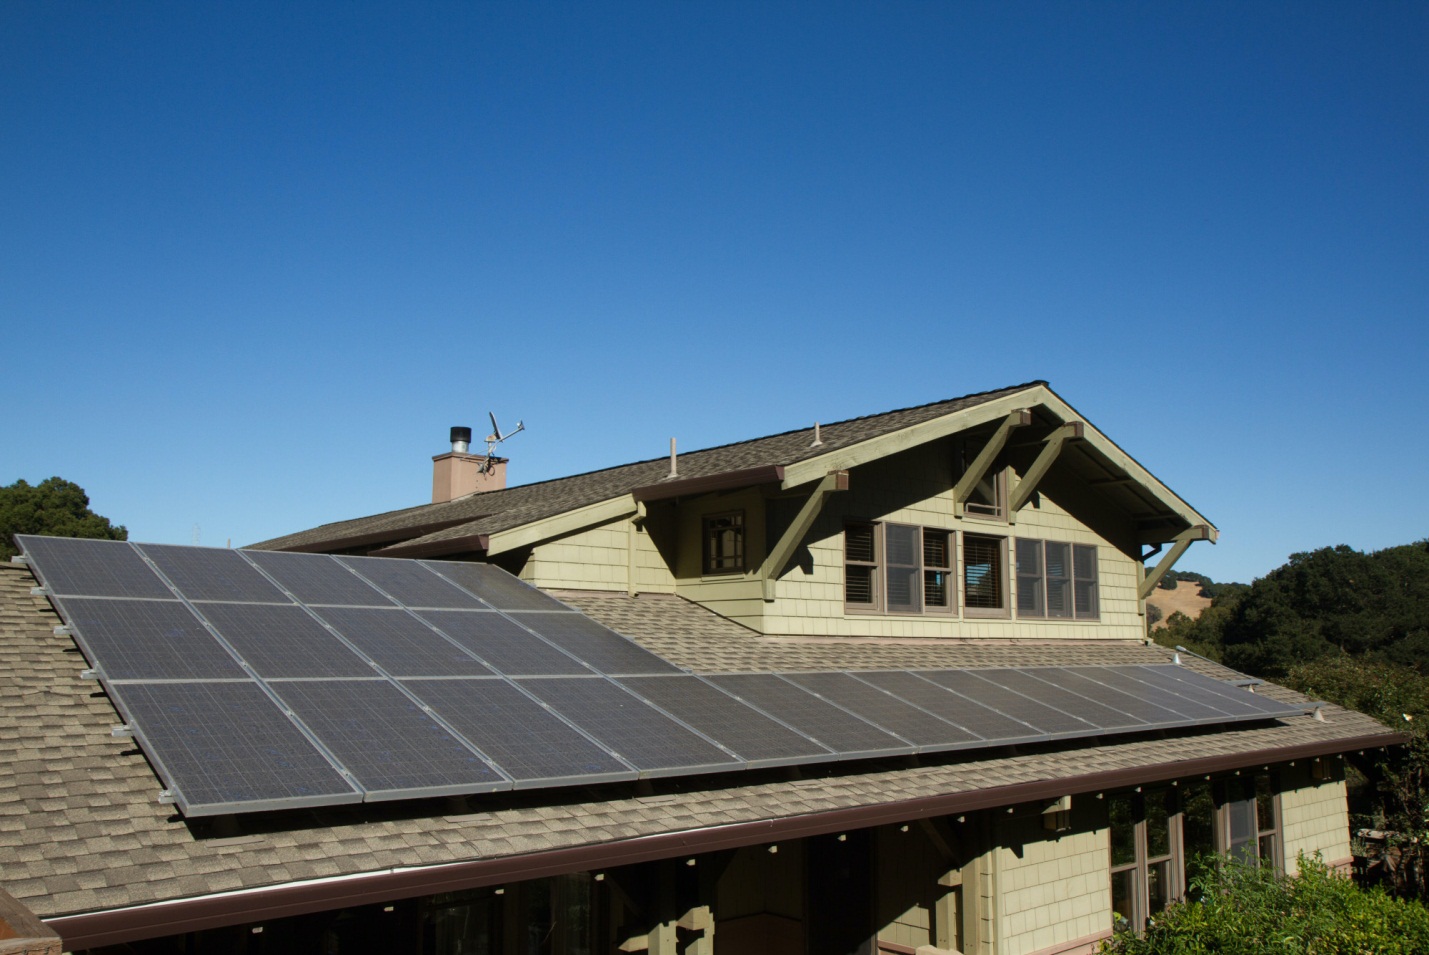 5 Undeniable Benefits of Going Solar for Your Home